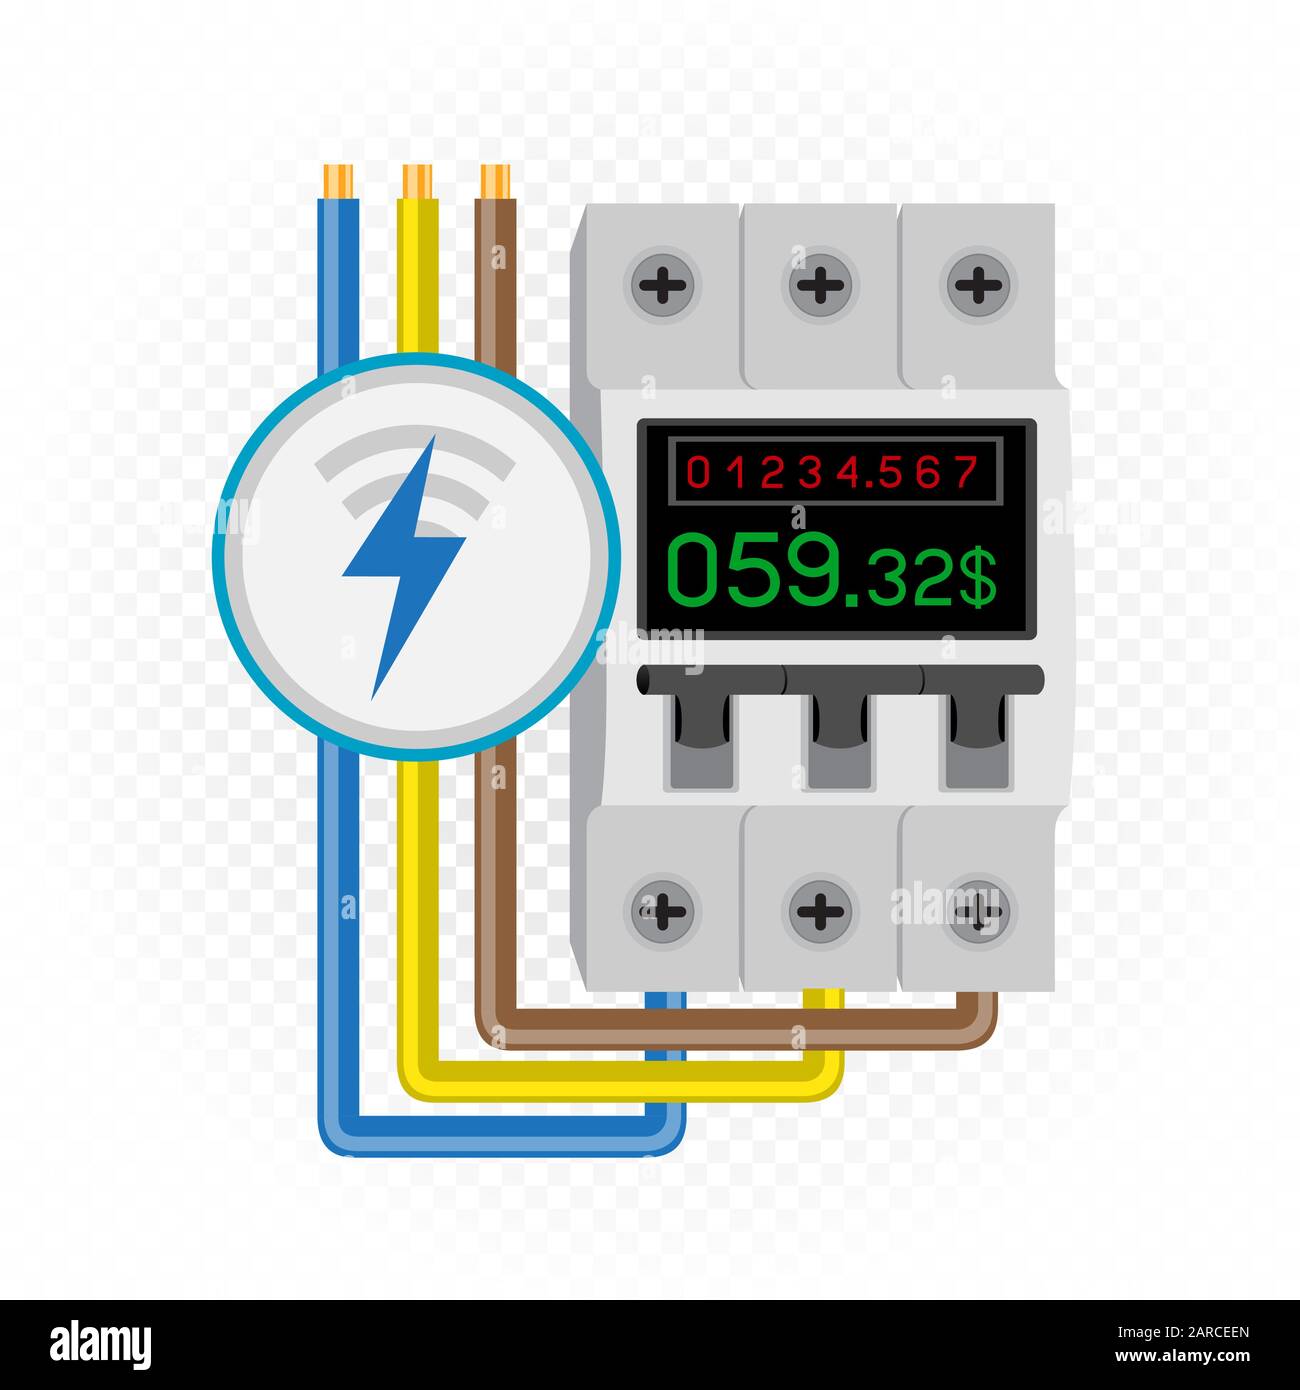 electric meter icon Stock Vector